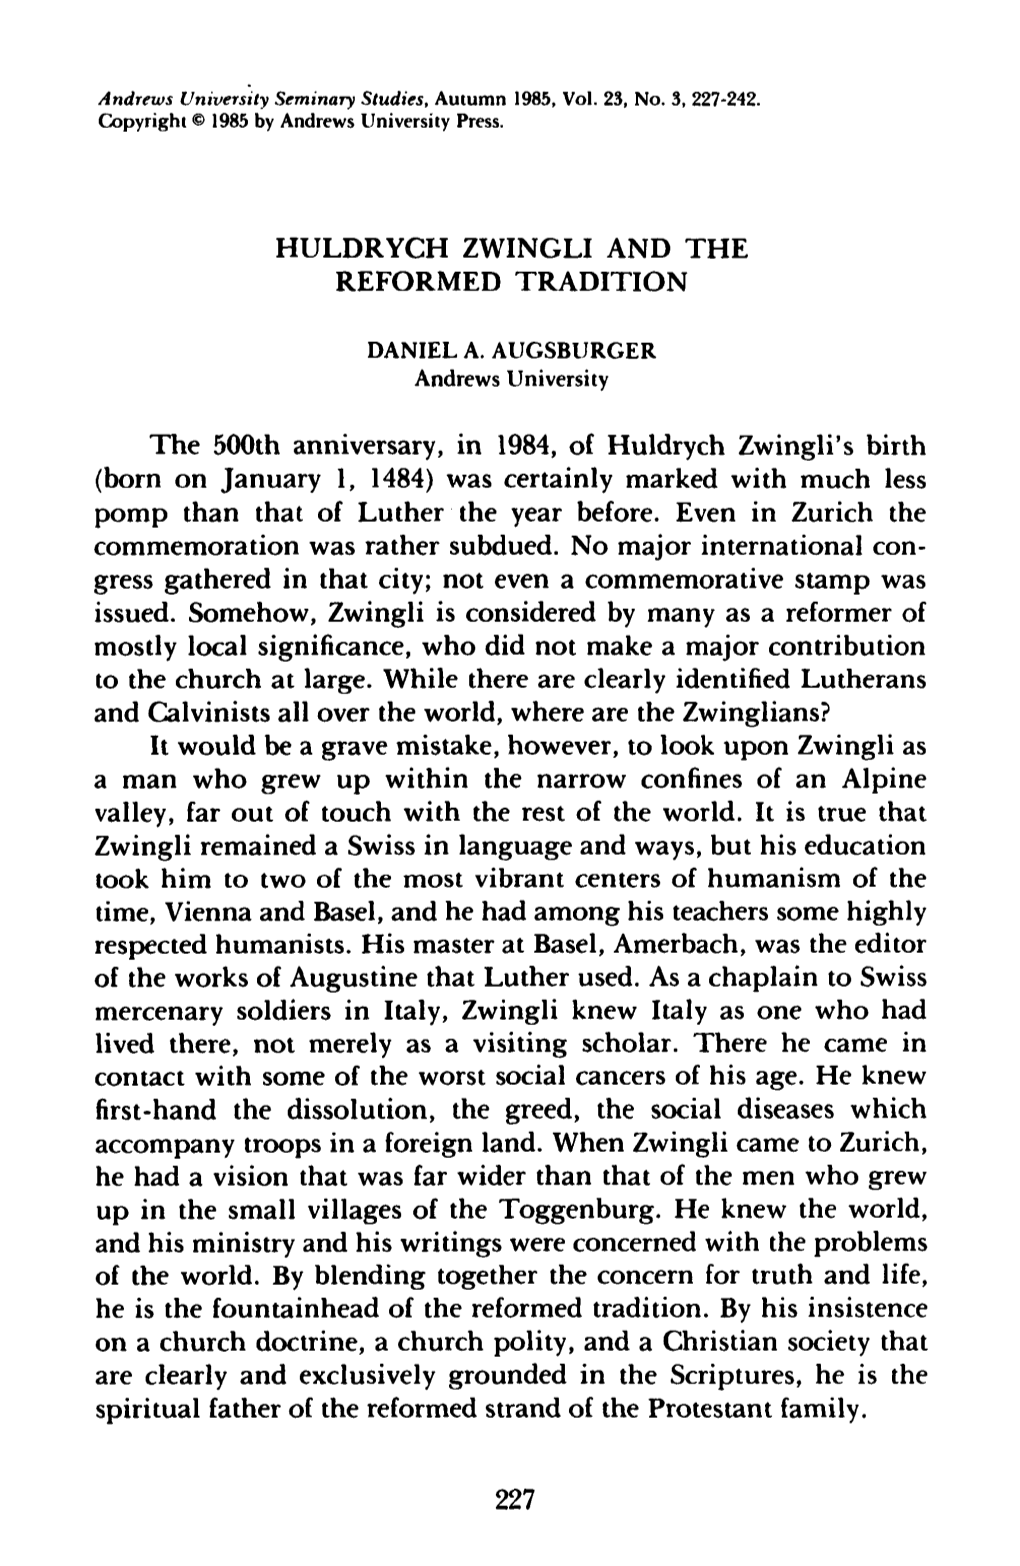 Huldrych Zwingli and the Reformed Tradition